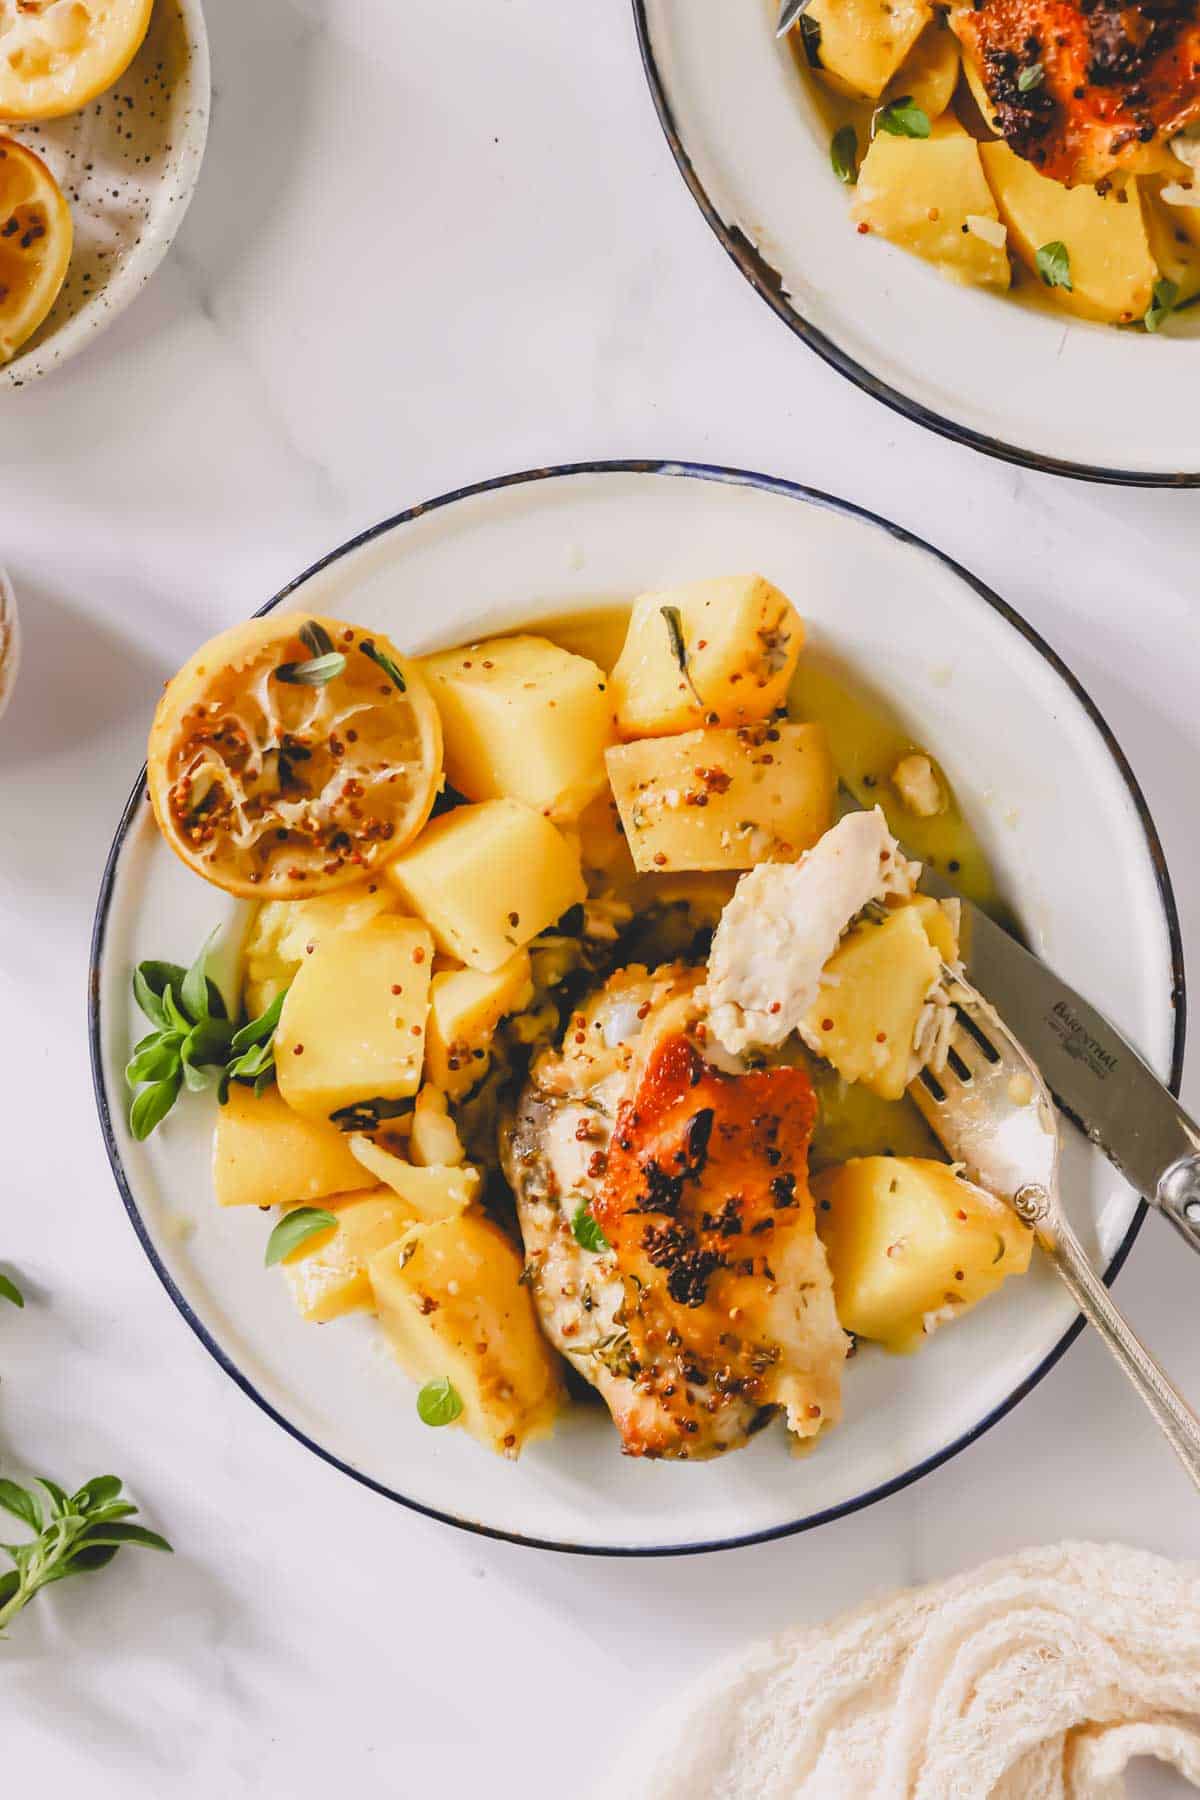 A plate of Greek lemon chicken and potatoes with a fork holding a bite.